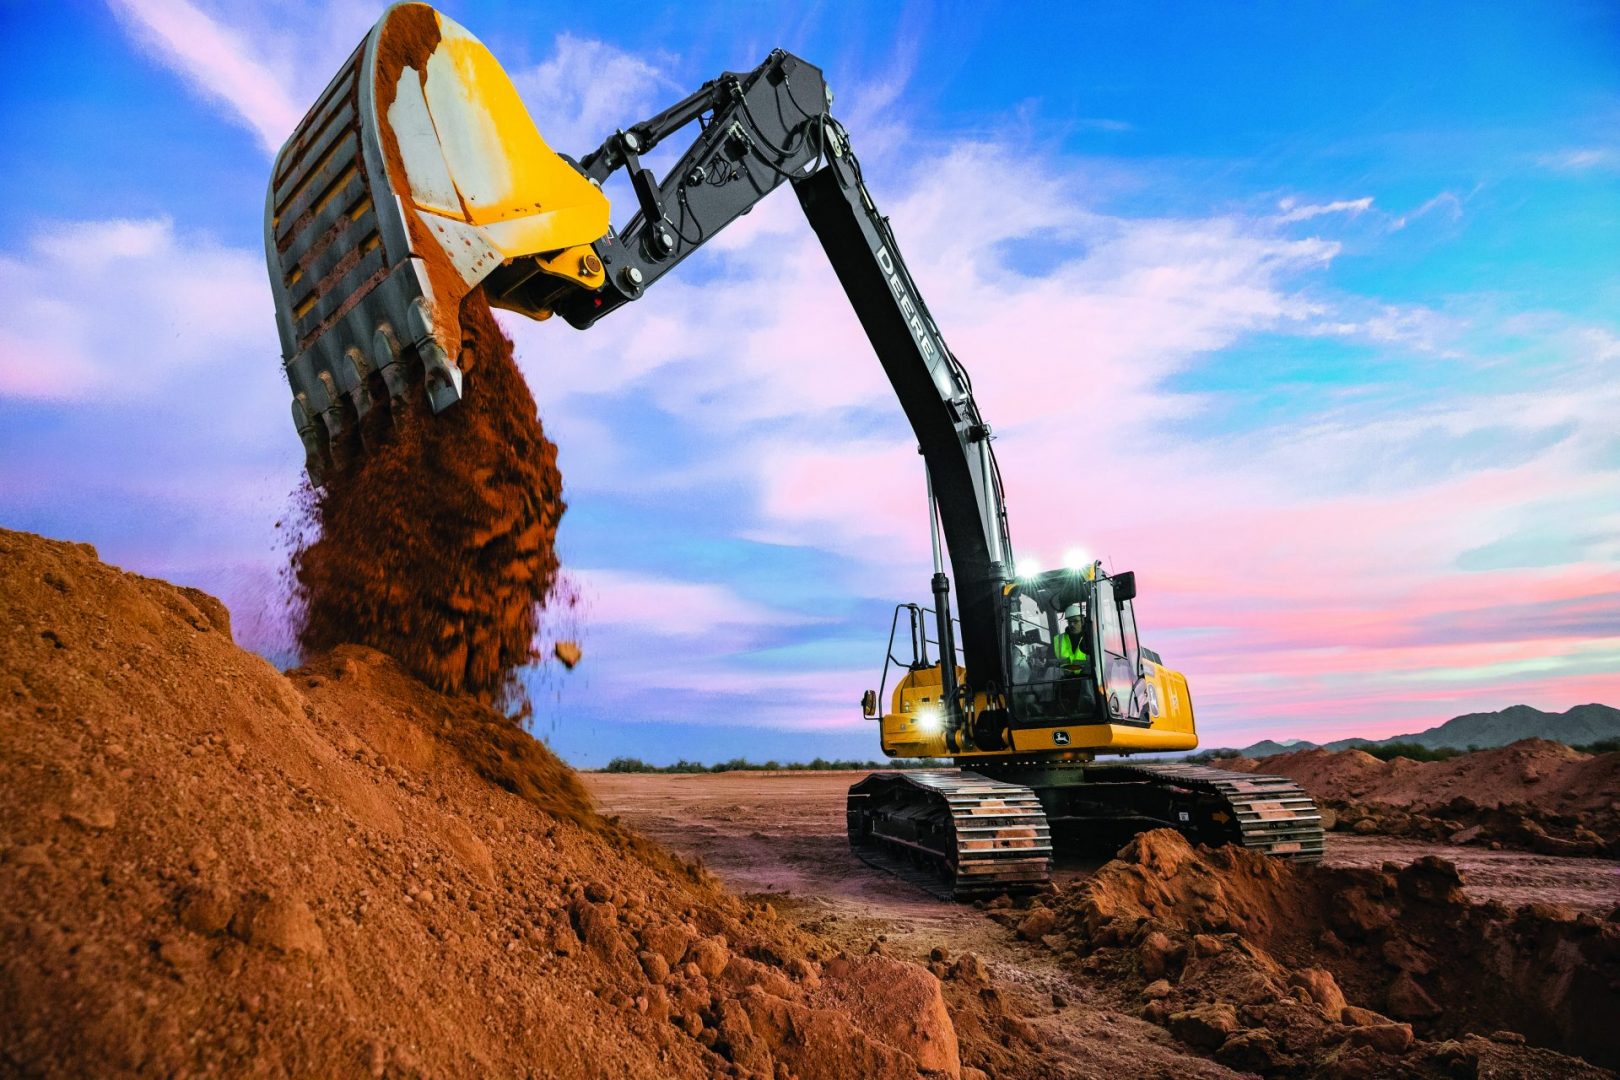 John Deere excavator dumps clay from its bucket, an excavator that is available through Fernandez's dealers.